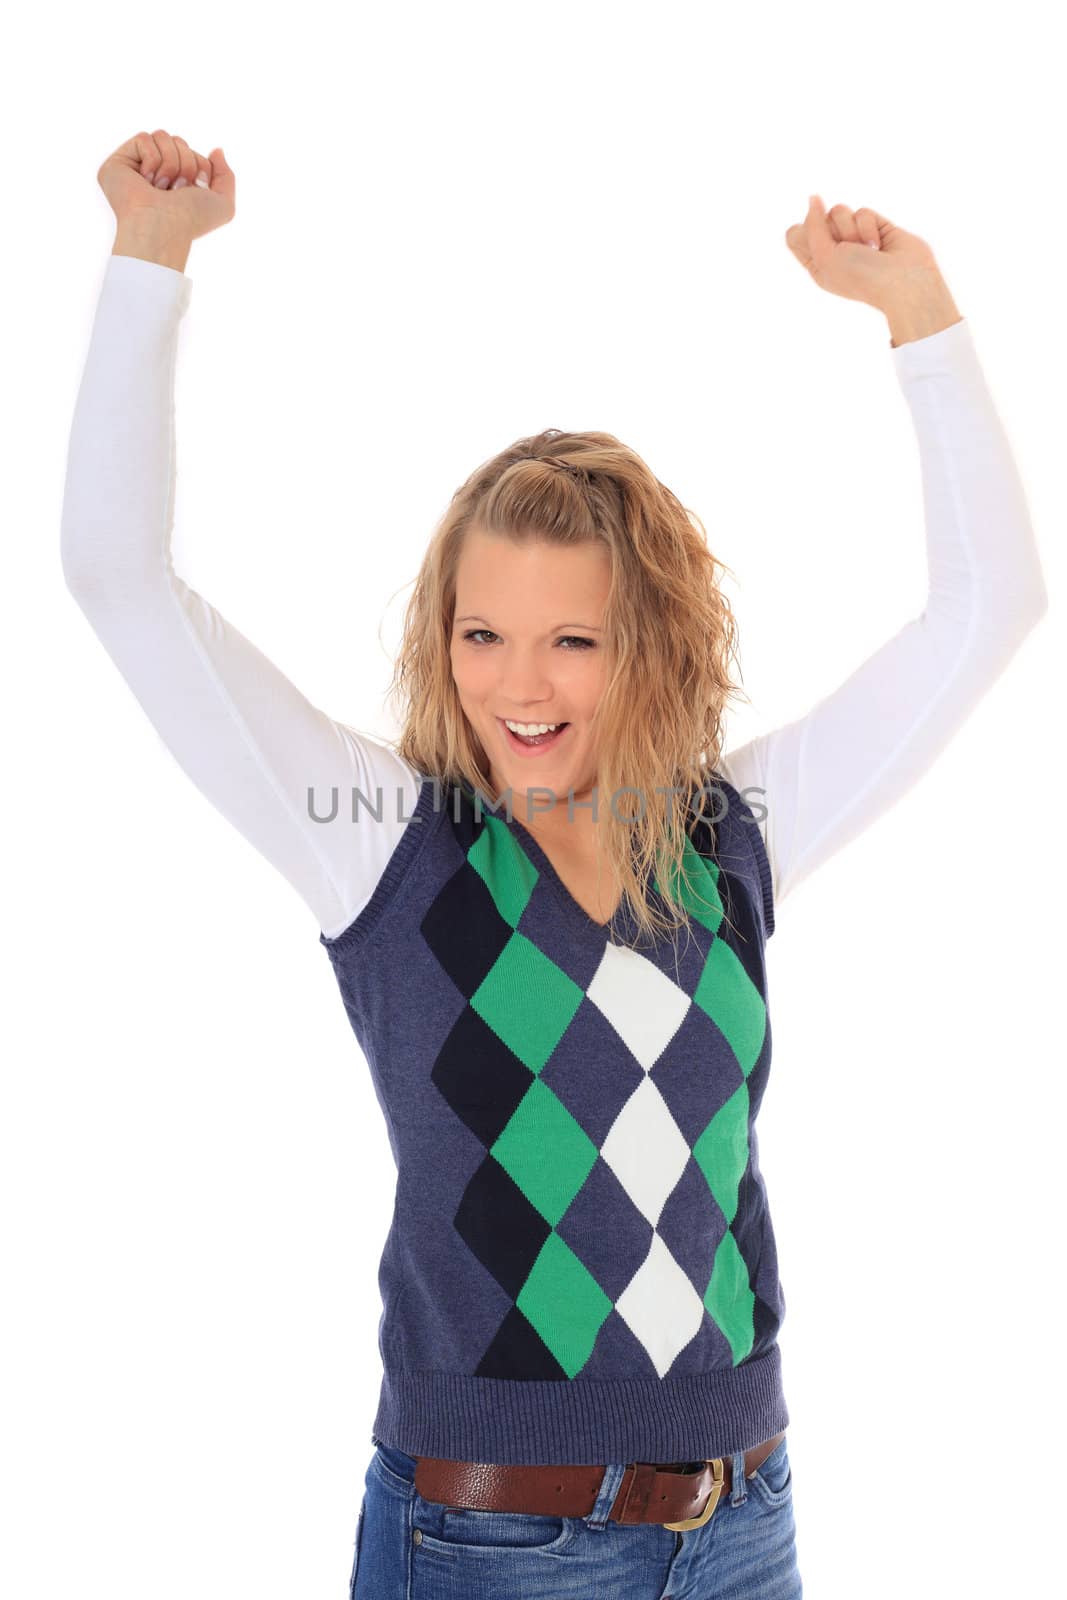 Cheering blonde woman. All on white background.